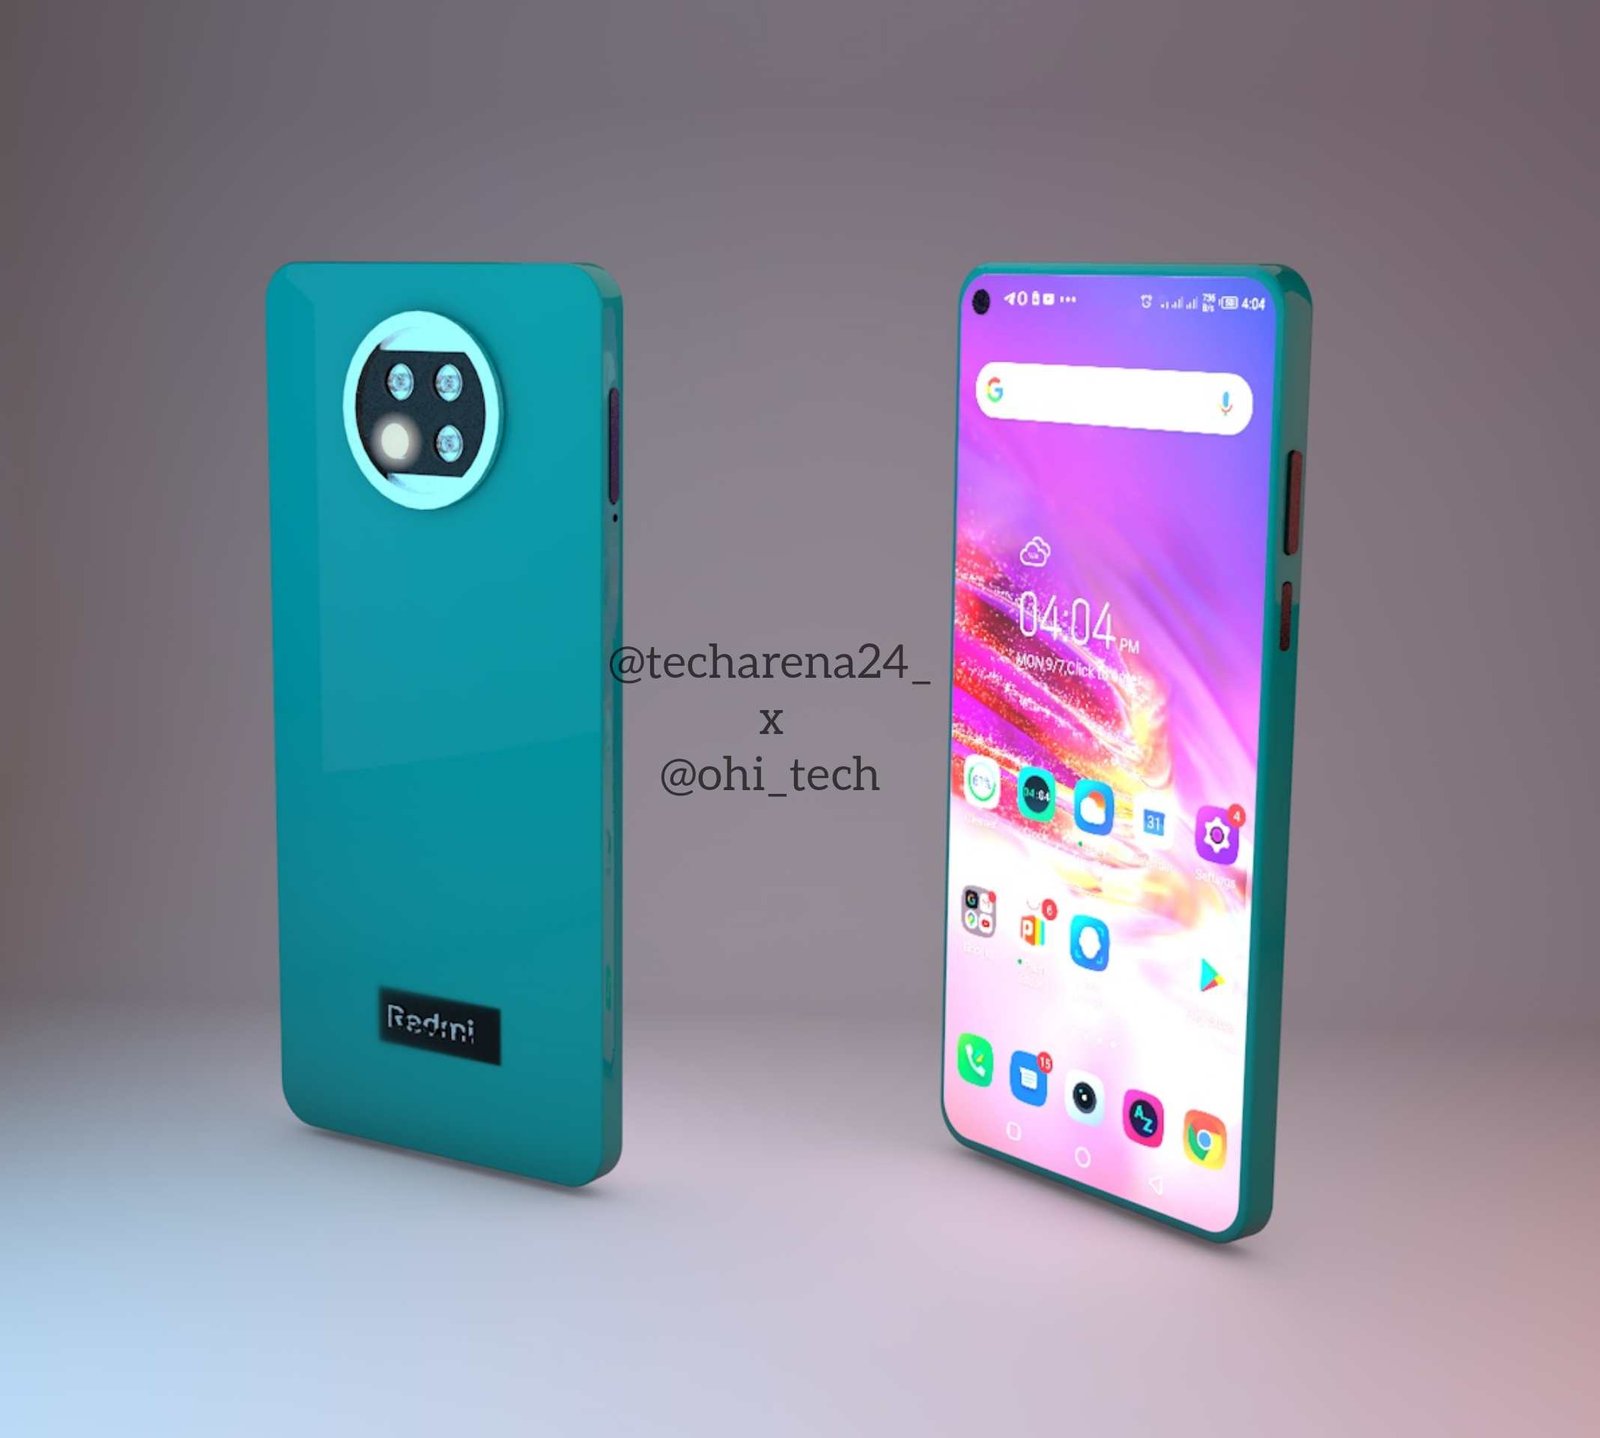 Rumor Redmi Note 10 Specs: 5G Network, 5120mAh Battery and More